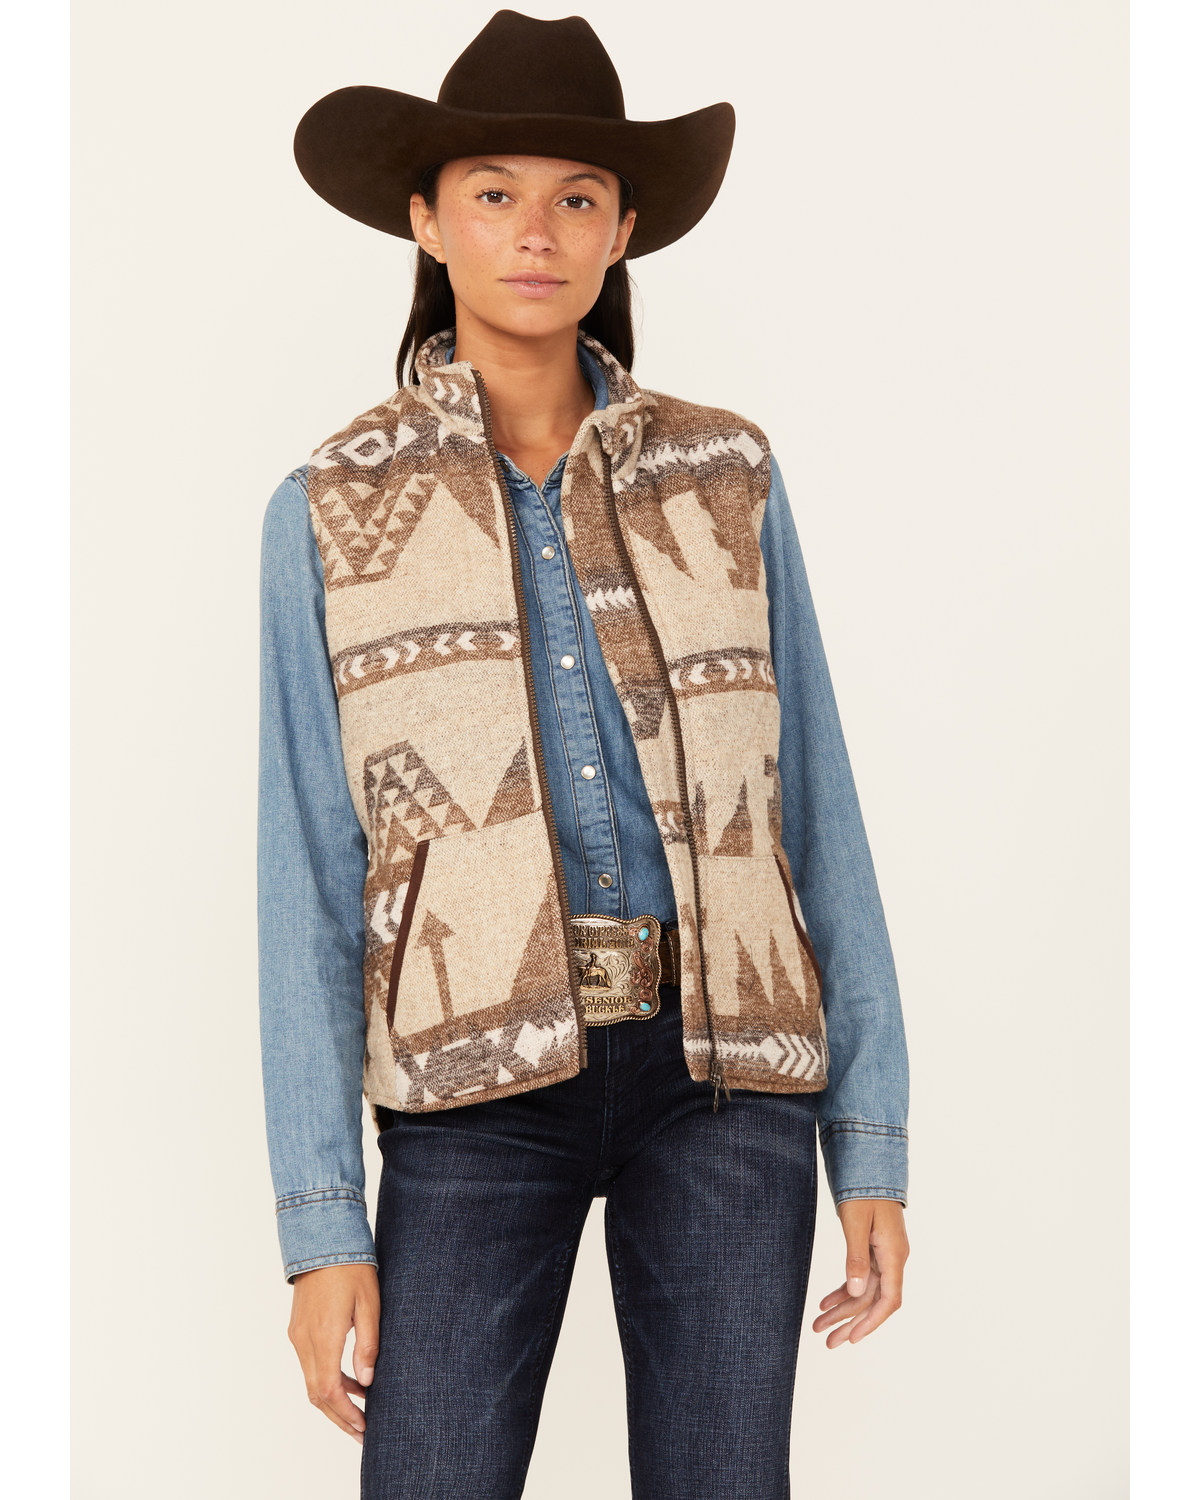 Outback Trading Co Women's Southwestern Print Tennessee Vest